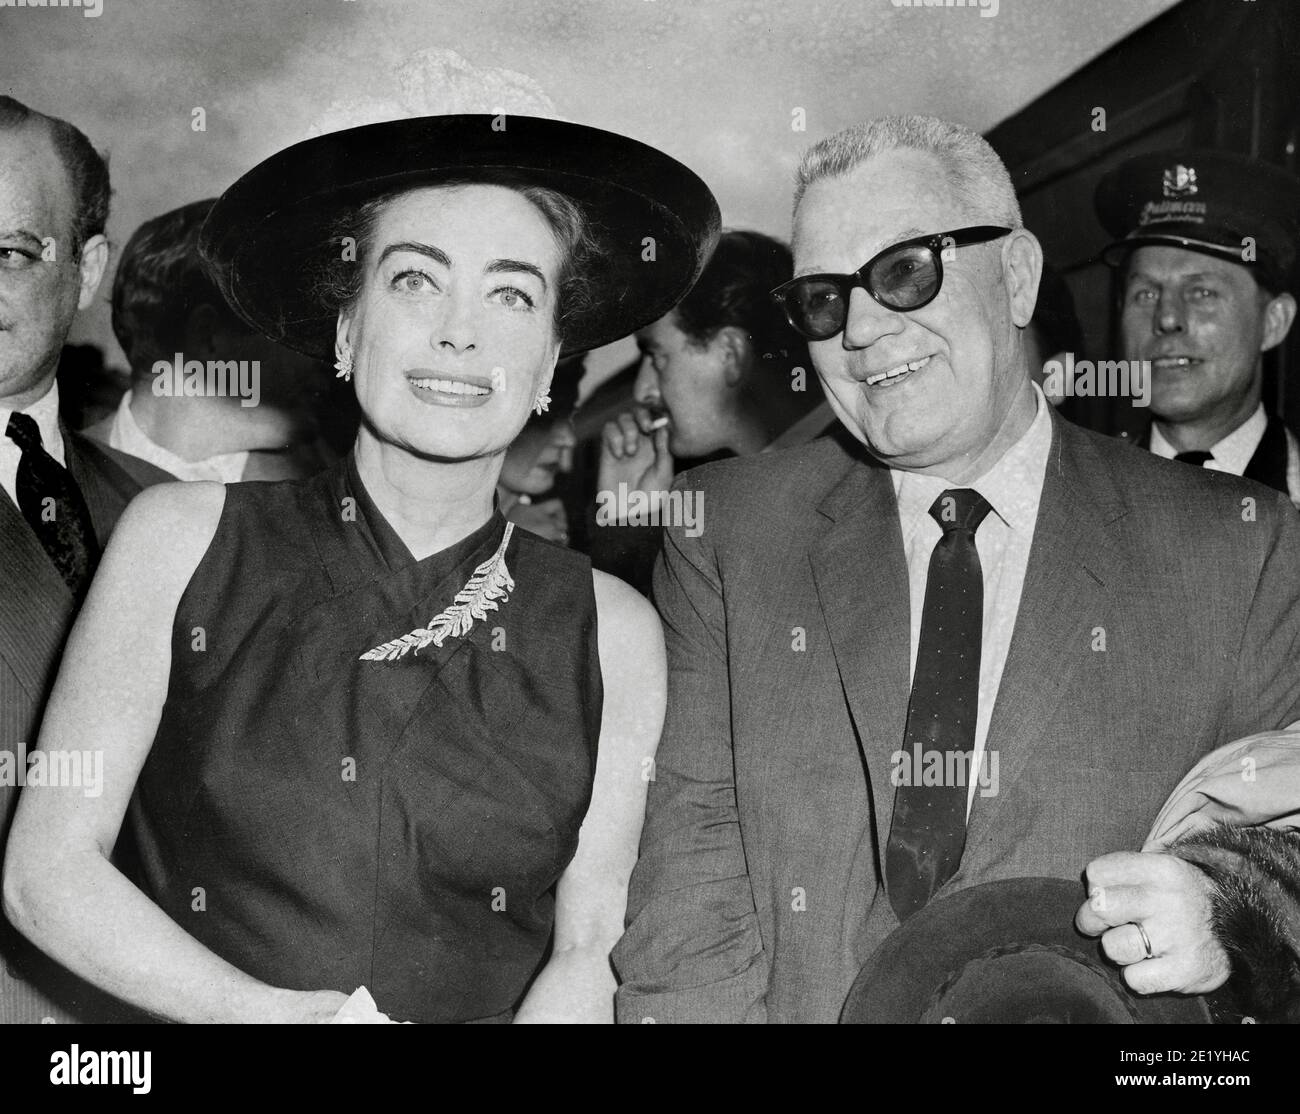 Joan Crawford and her husband, (President of Pepsi Cola) Alfred Steele, on their arrival at Waterloo Station in London, 1956 / File Reference # 34082-102THA Stock Photo